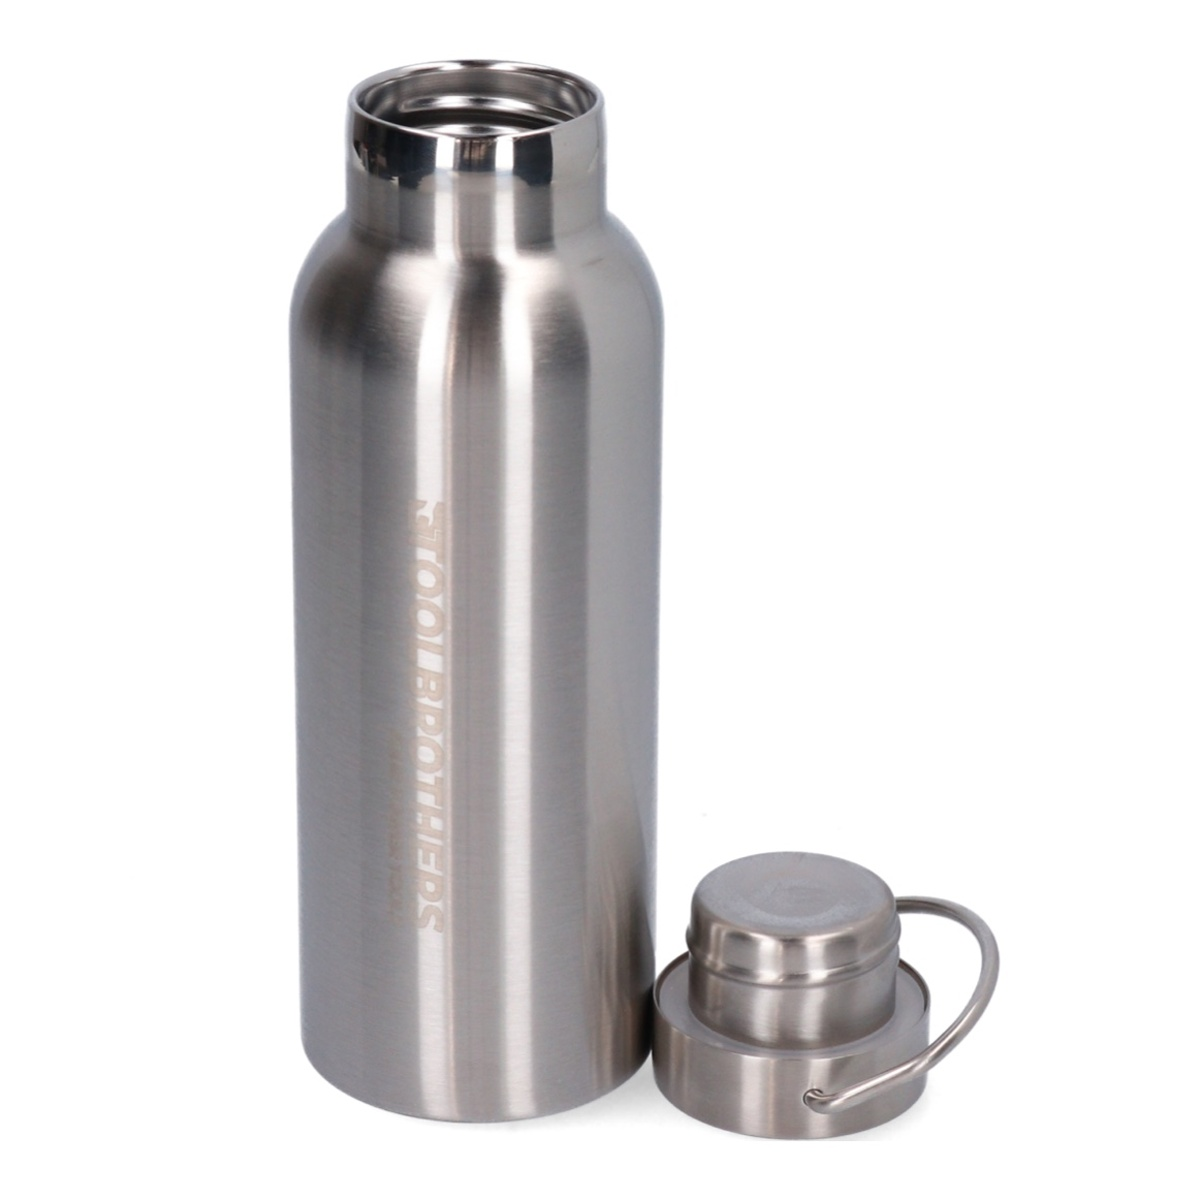 TOOLBROTHERS FanEdelstahlTrinkflasche Flasche Silber